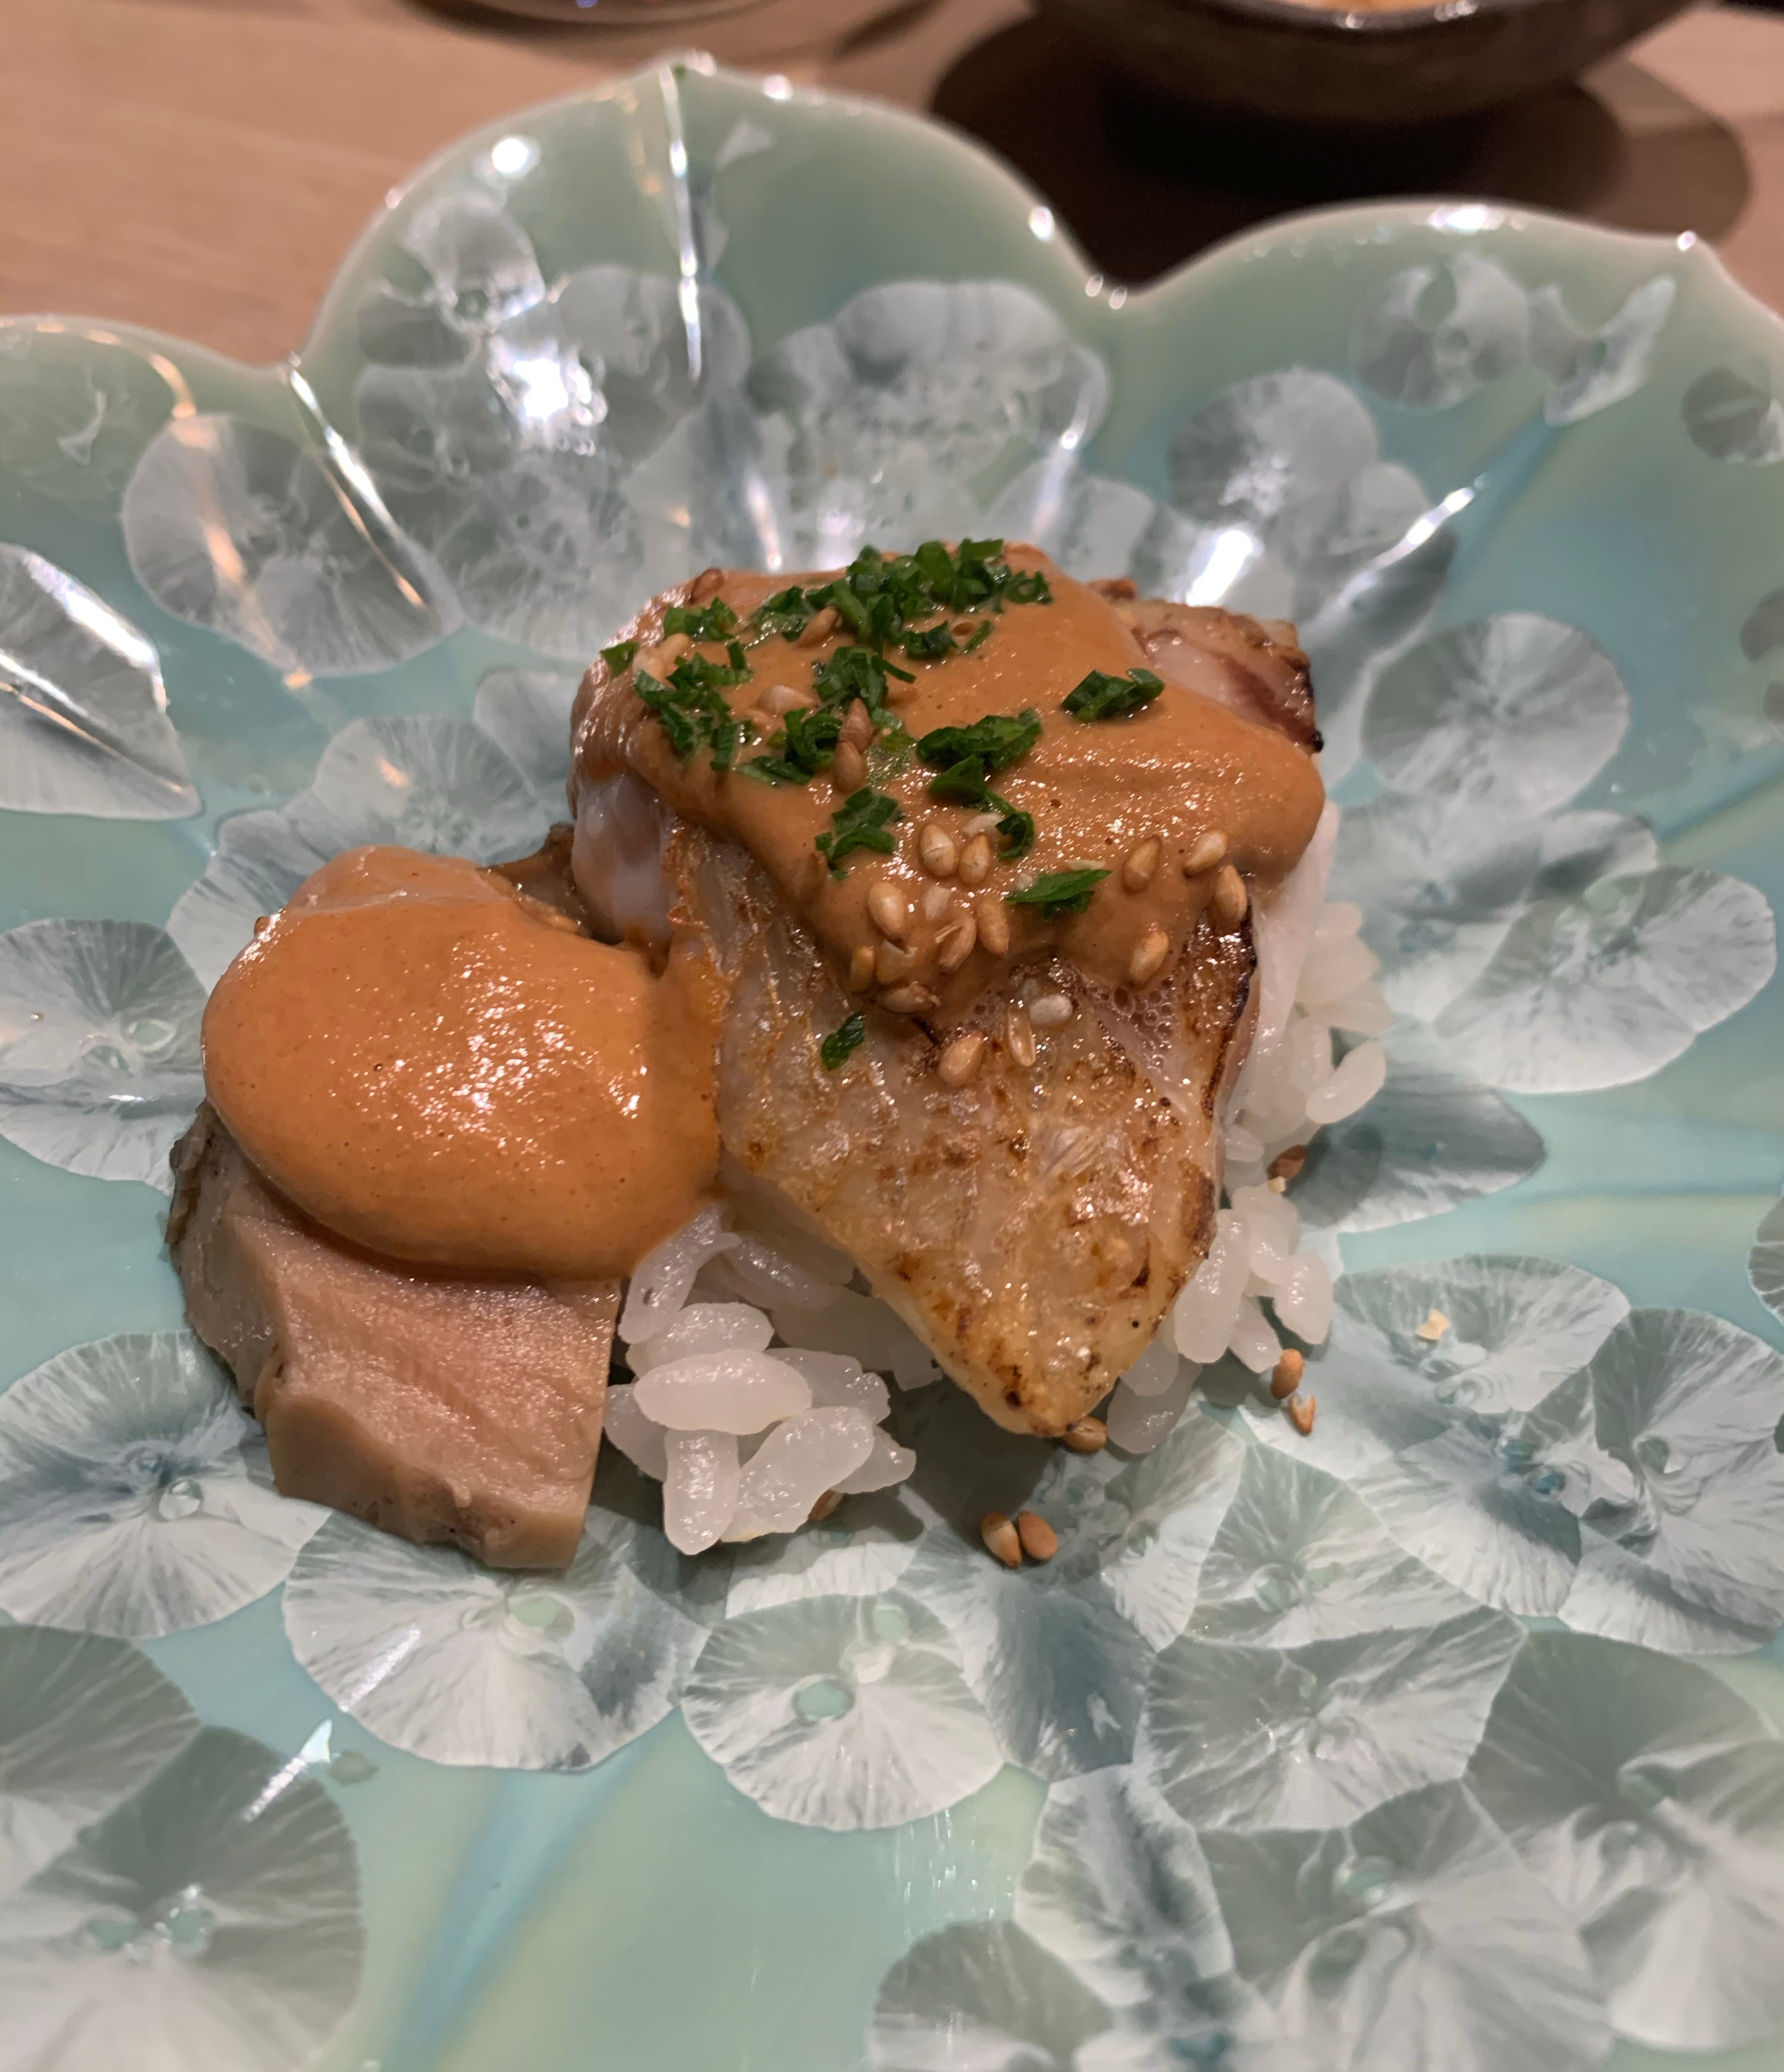 A plate with a light-brown cooked seaperch filet resting on top of a bed of rice. Next to it is a similarly-coloured slice of abalone. Both pieces of seafood have a dollop of orange sauce on top.